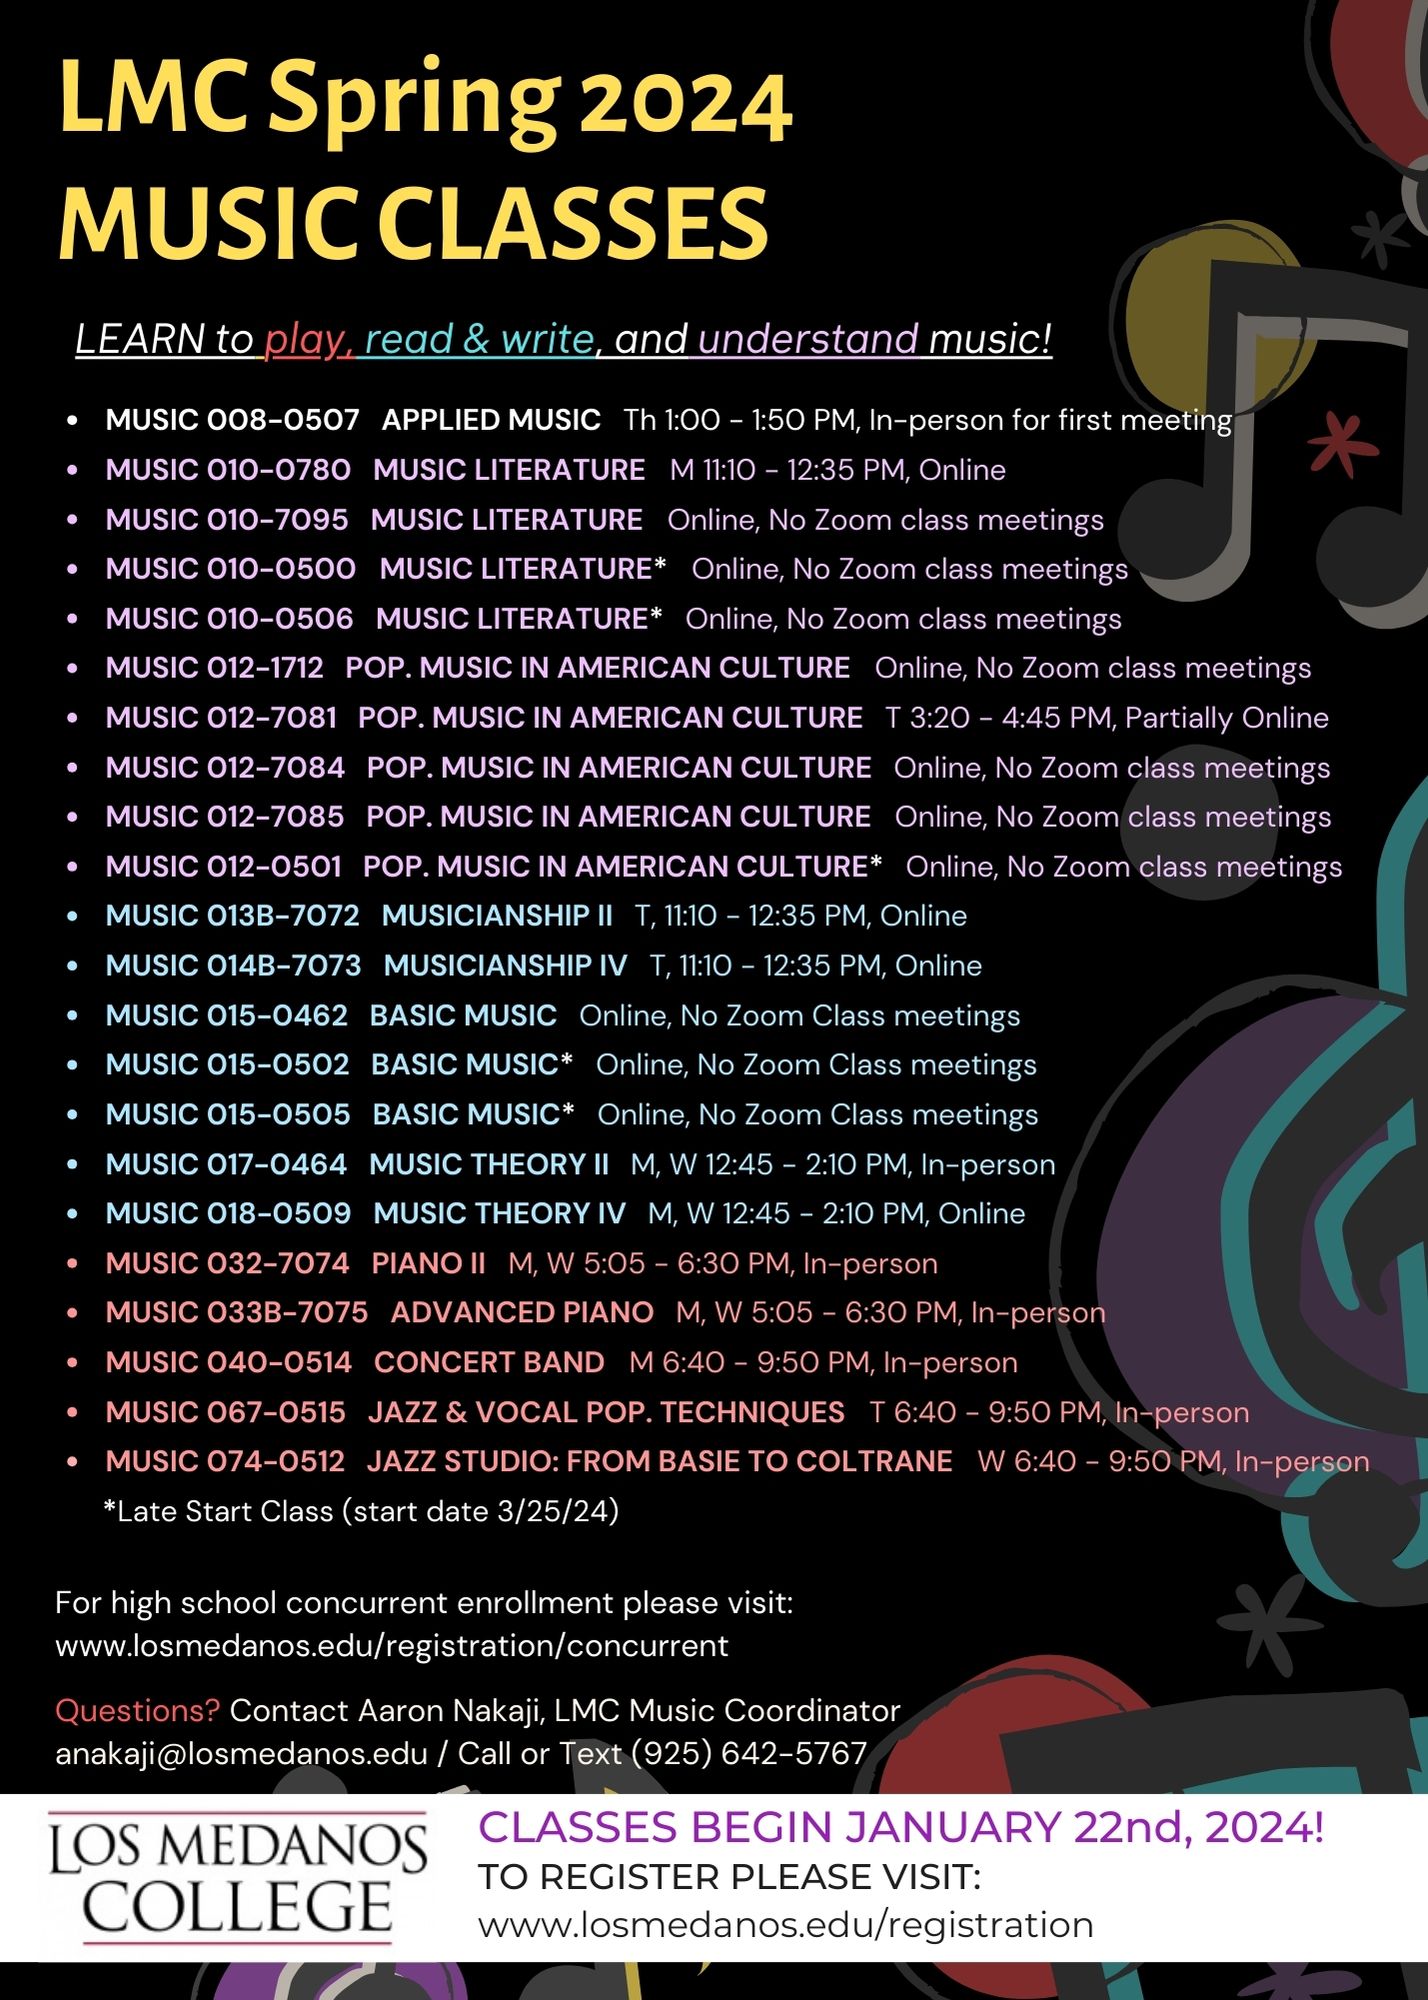 Spring 2024 Music Classes Flyer